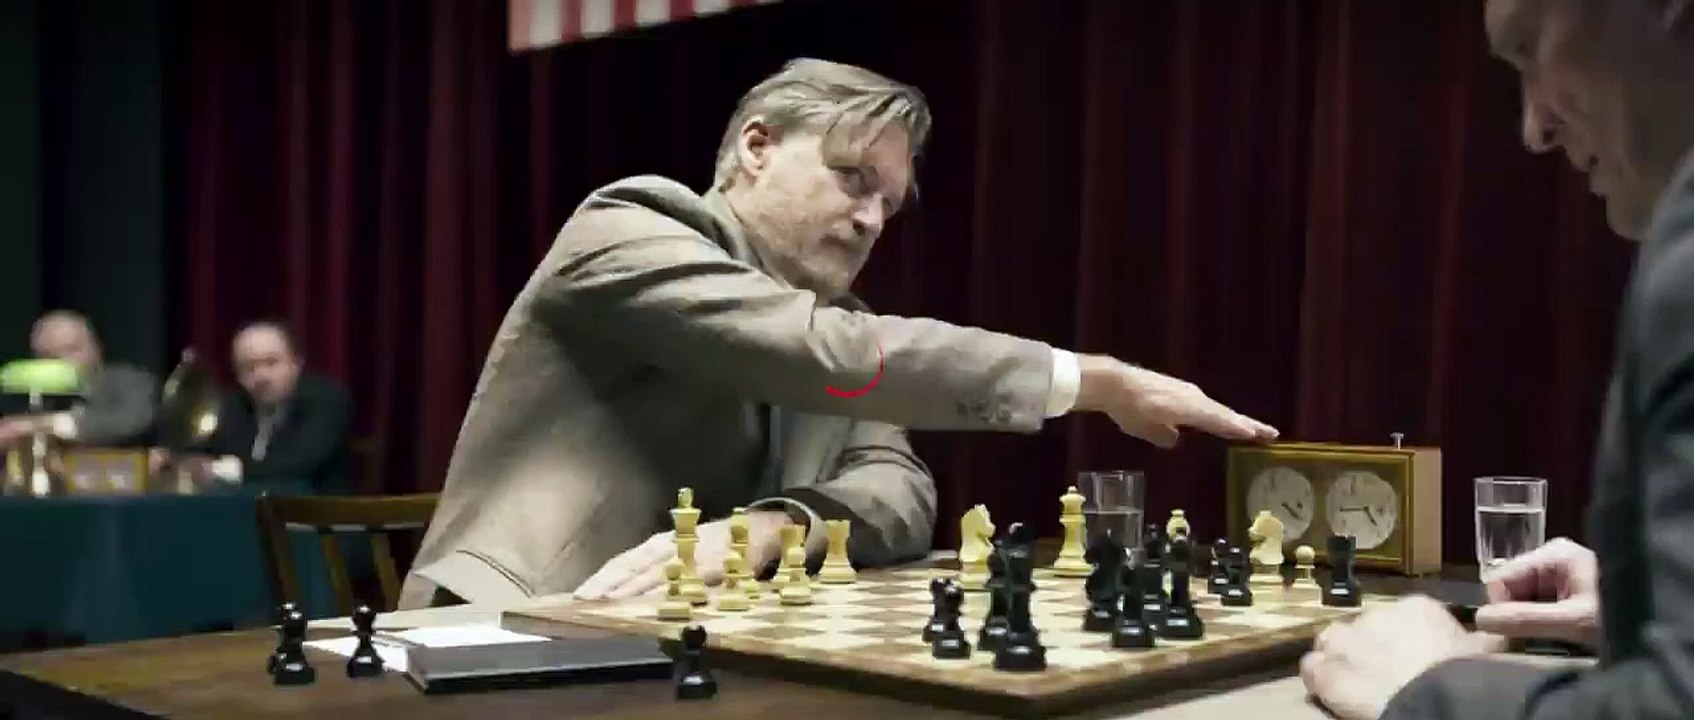 Bill Pullman on Subbing for William Hurt in 'The Coldest Game